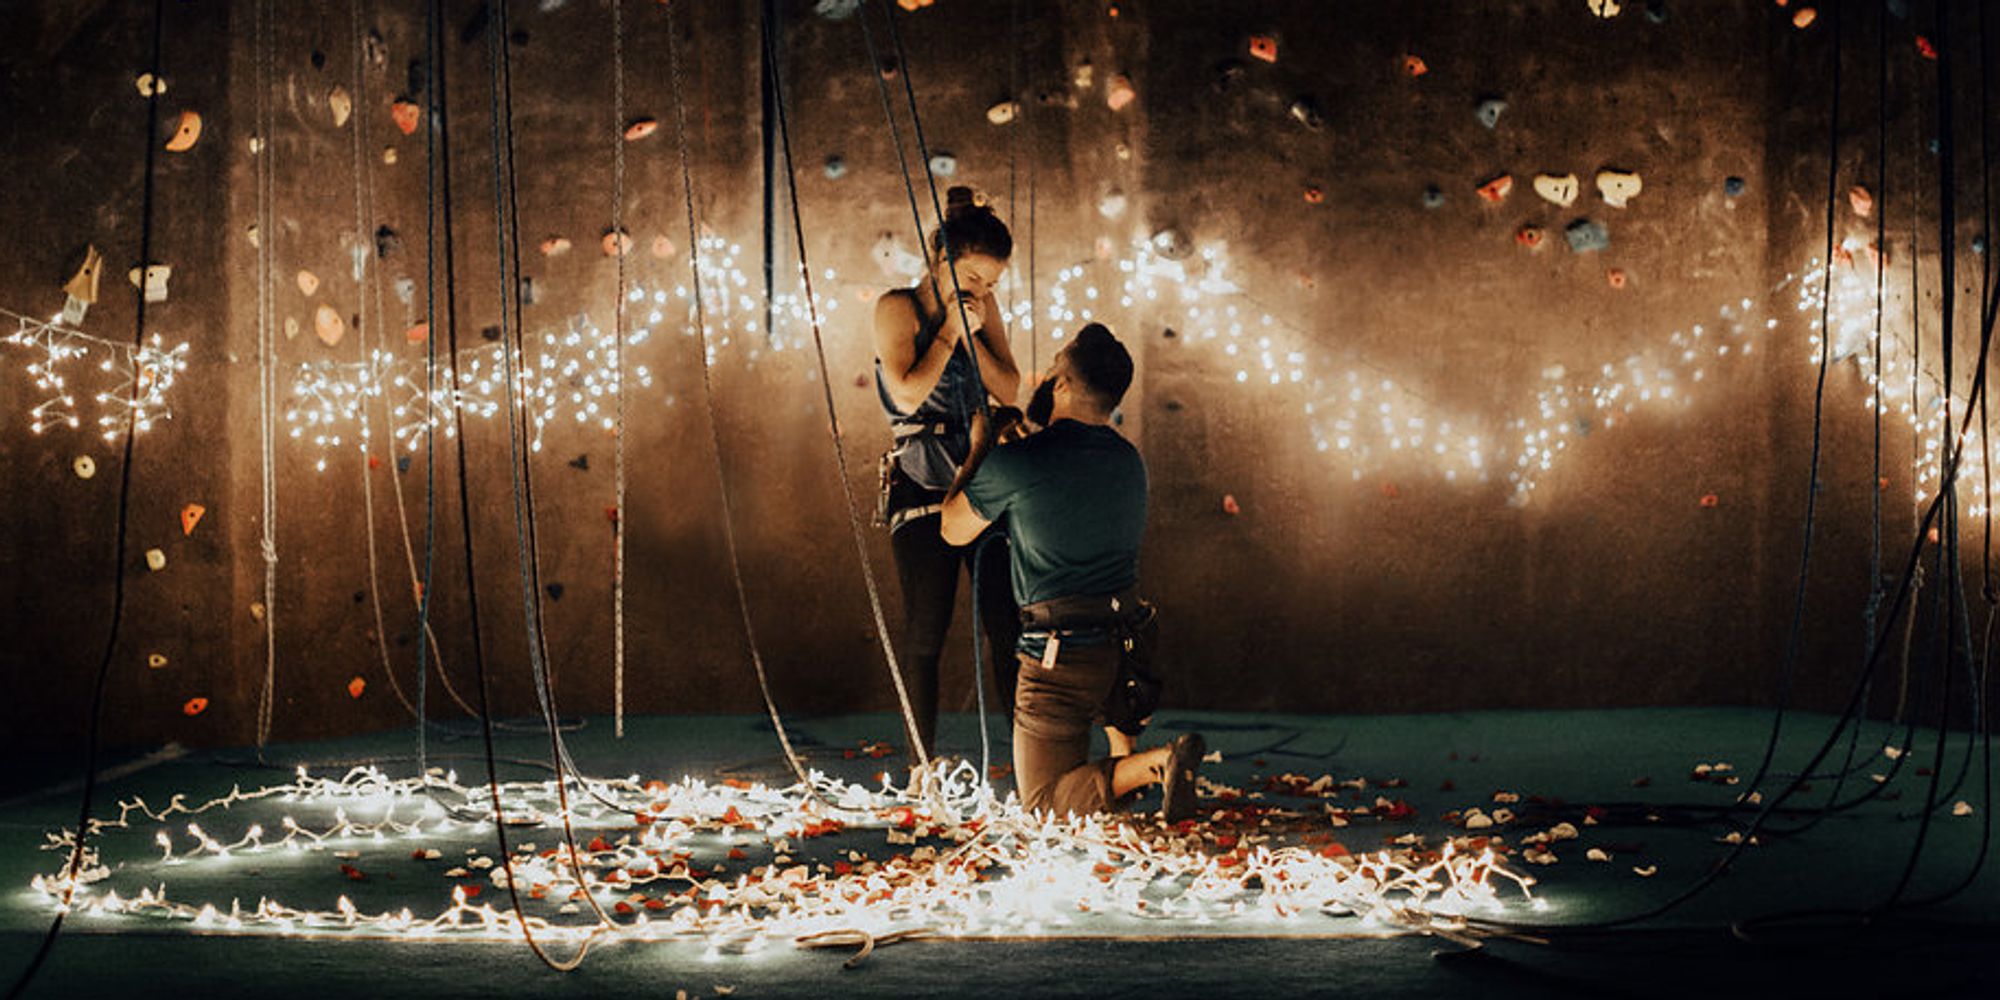 This Romantic Rock Climbing Proposal Will Rock Your World | The ... - Huffington Post